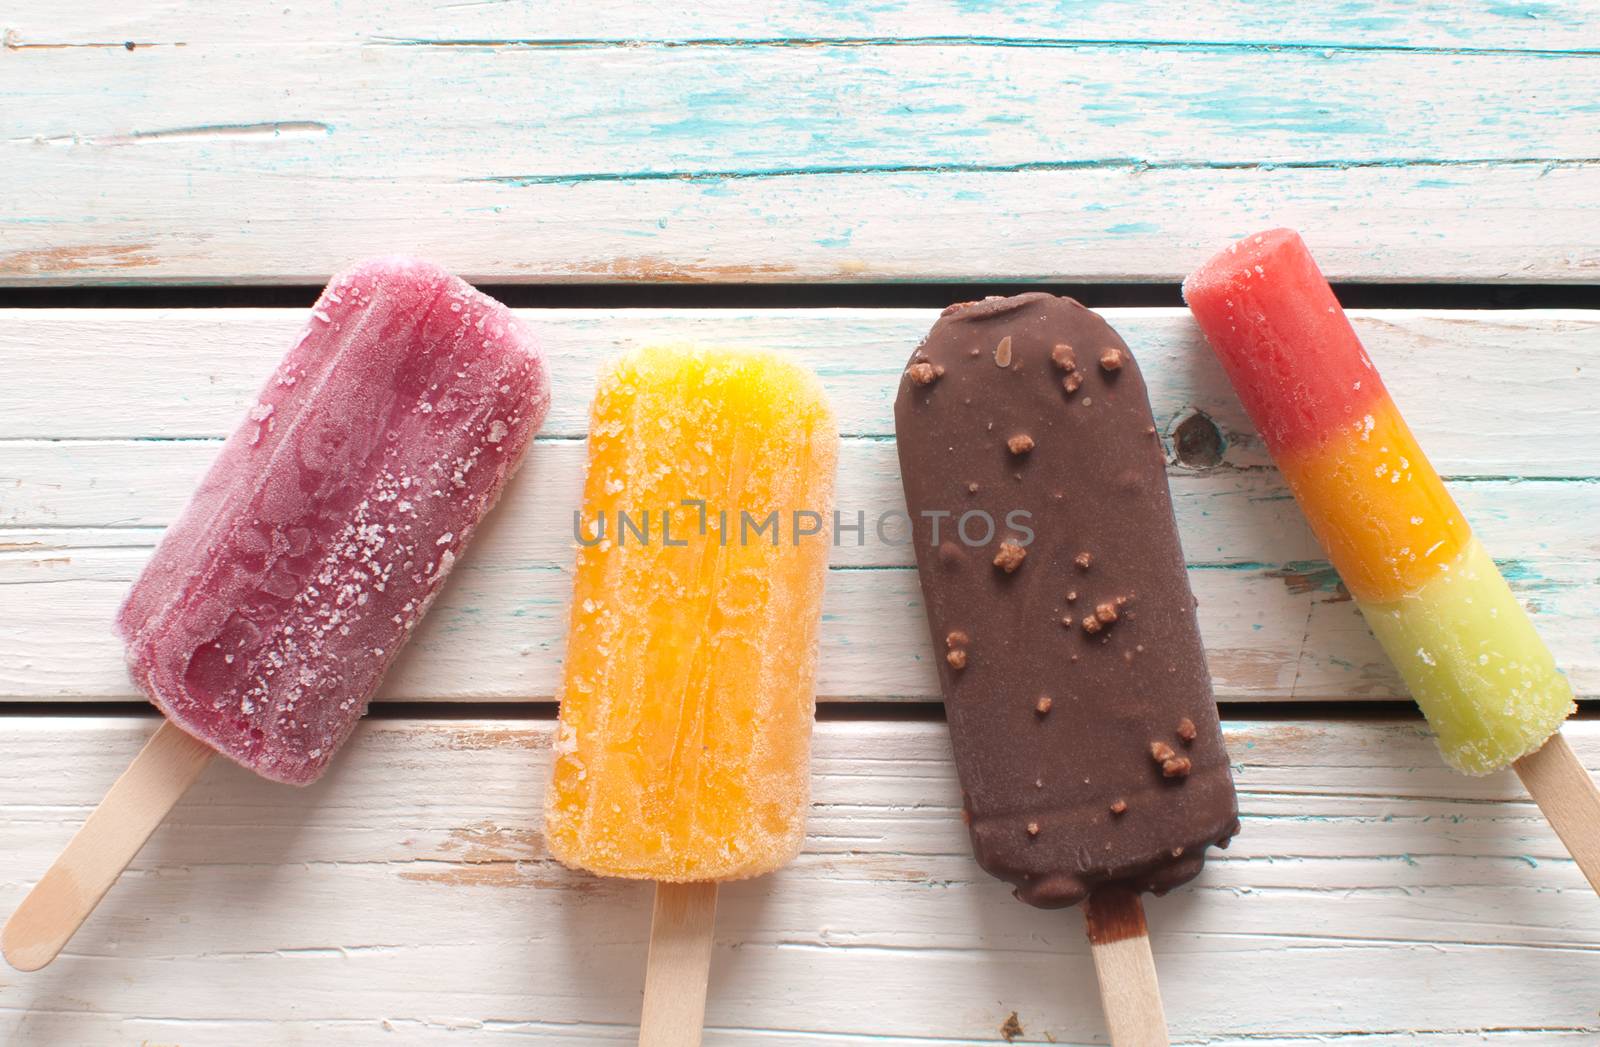 Assorted flavored ice lollies over a wooden background